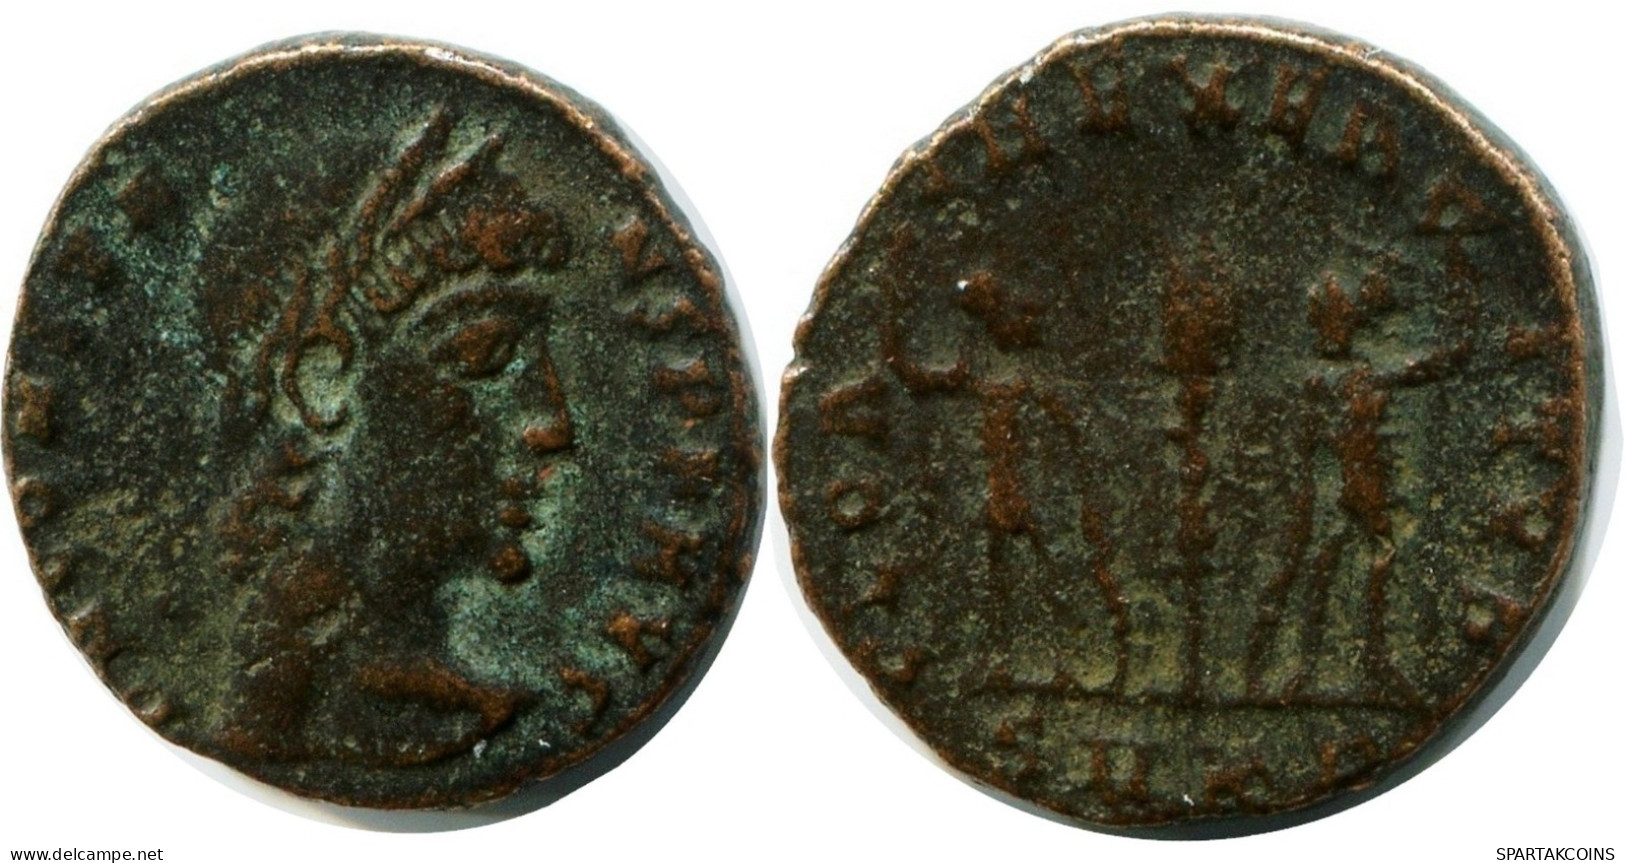 CONSTANS MINTED IN CYZICUS FROM THE ROYAL ONTARIO MUSEUM #ANC11650.14.D.A - L'Empire Chrétien (307 à 363)